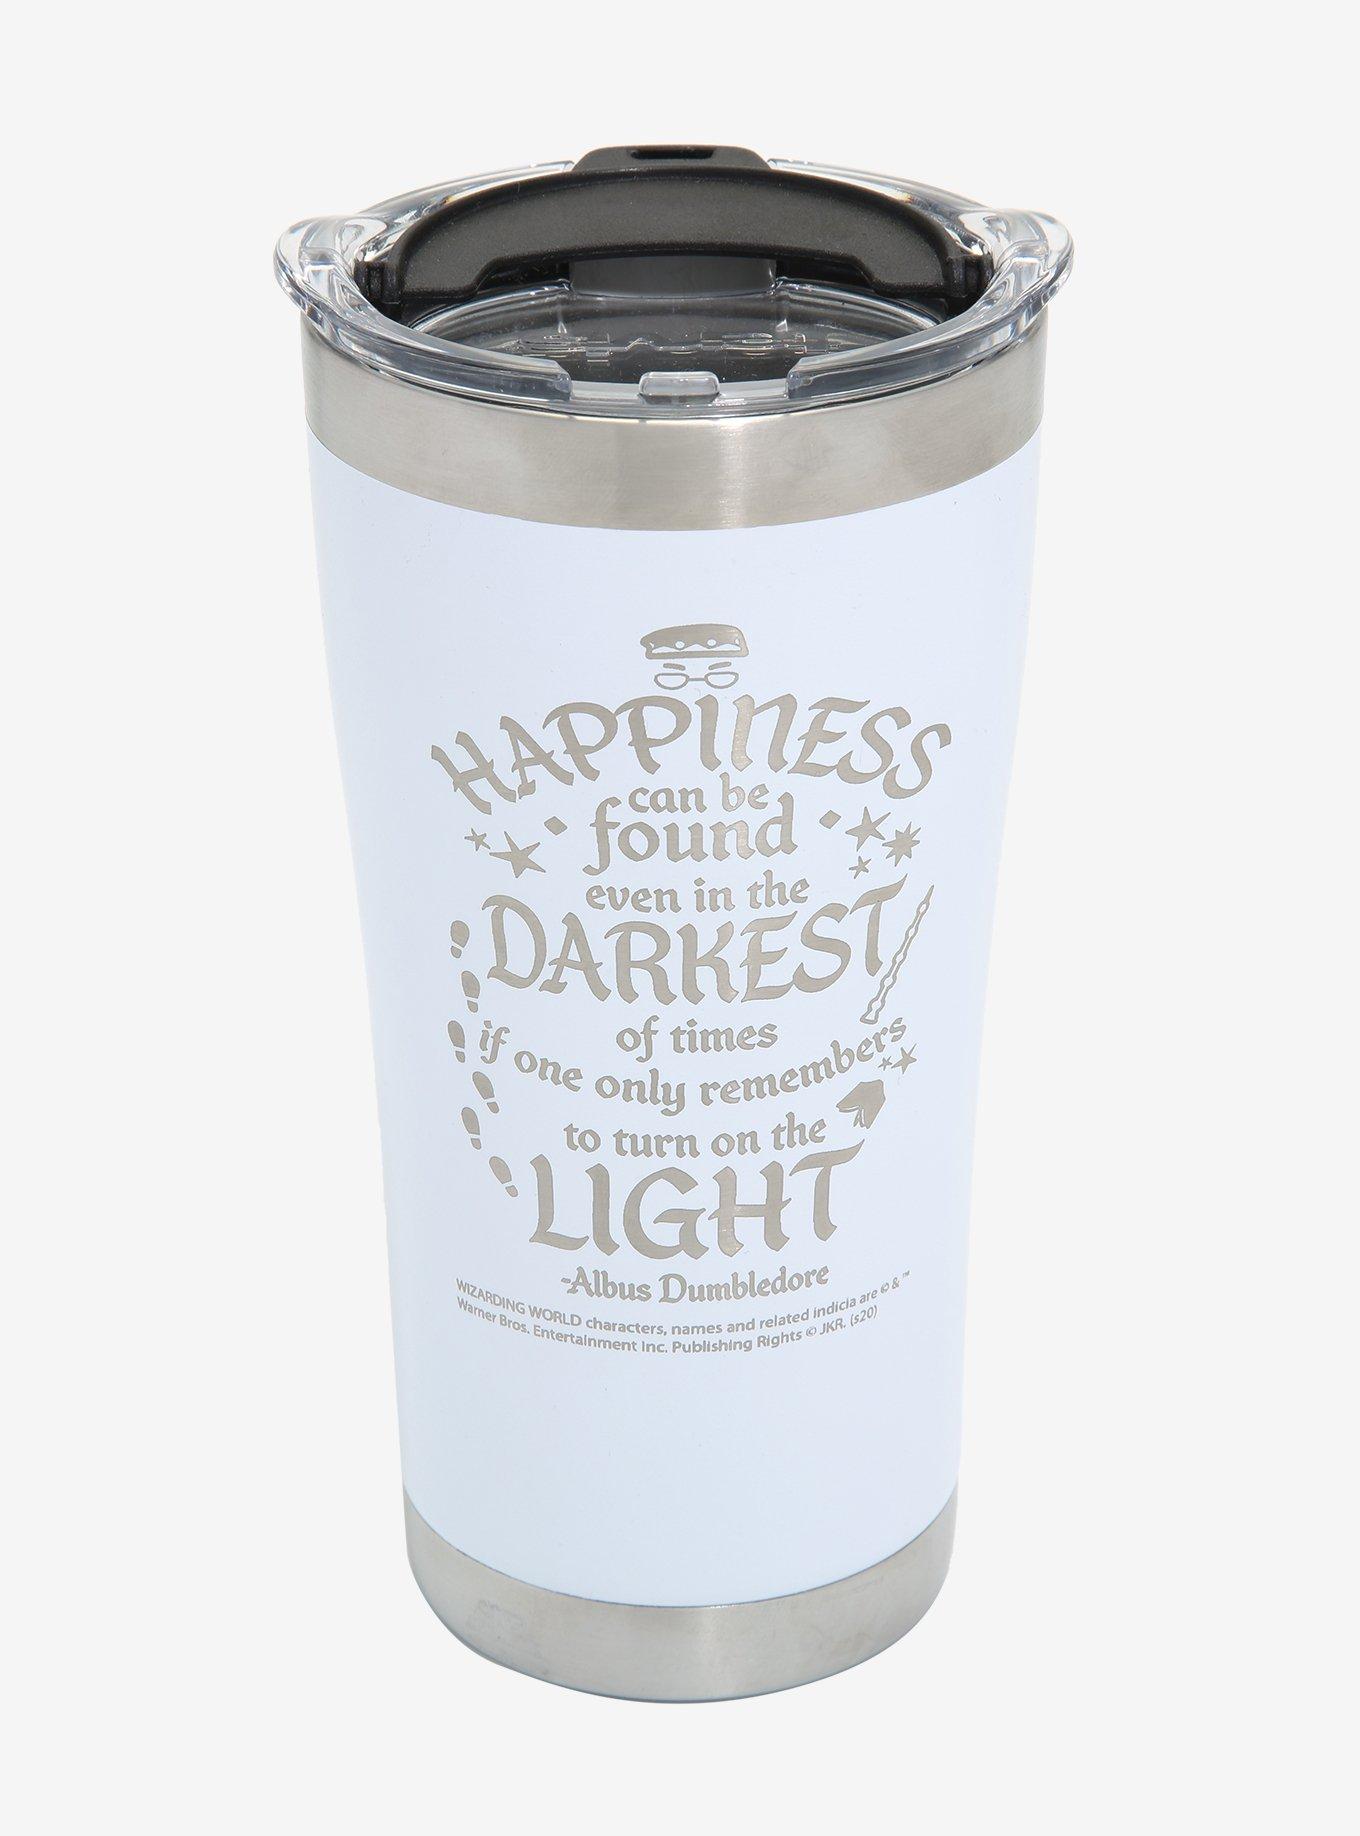 Harry Potter Dumbledore Quote Stainless Steel Travel Mug, , hi-res